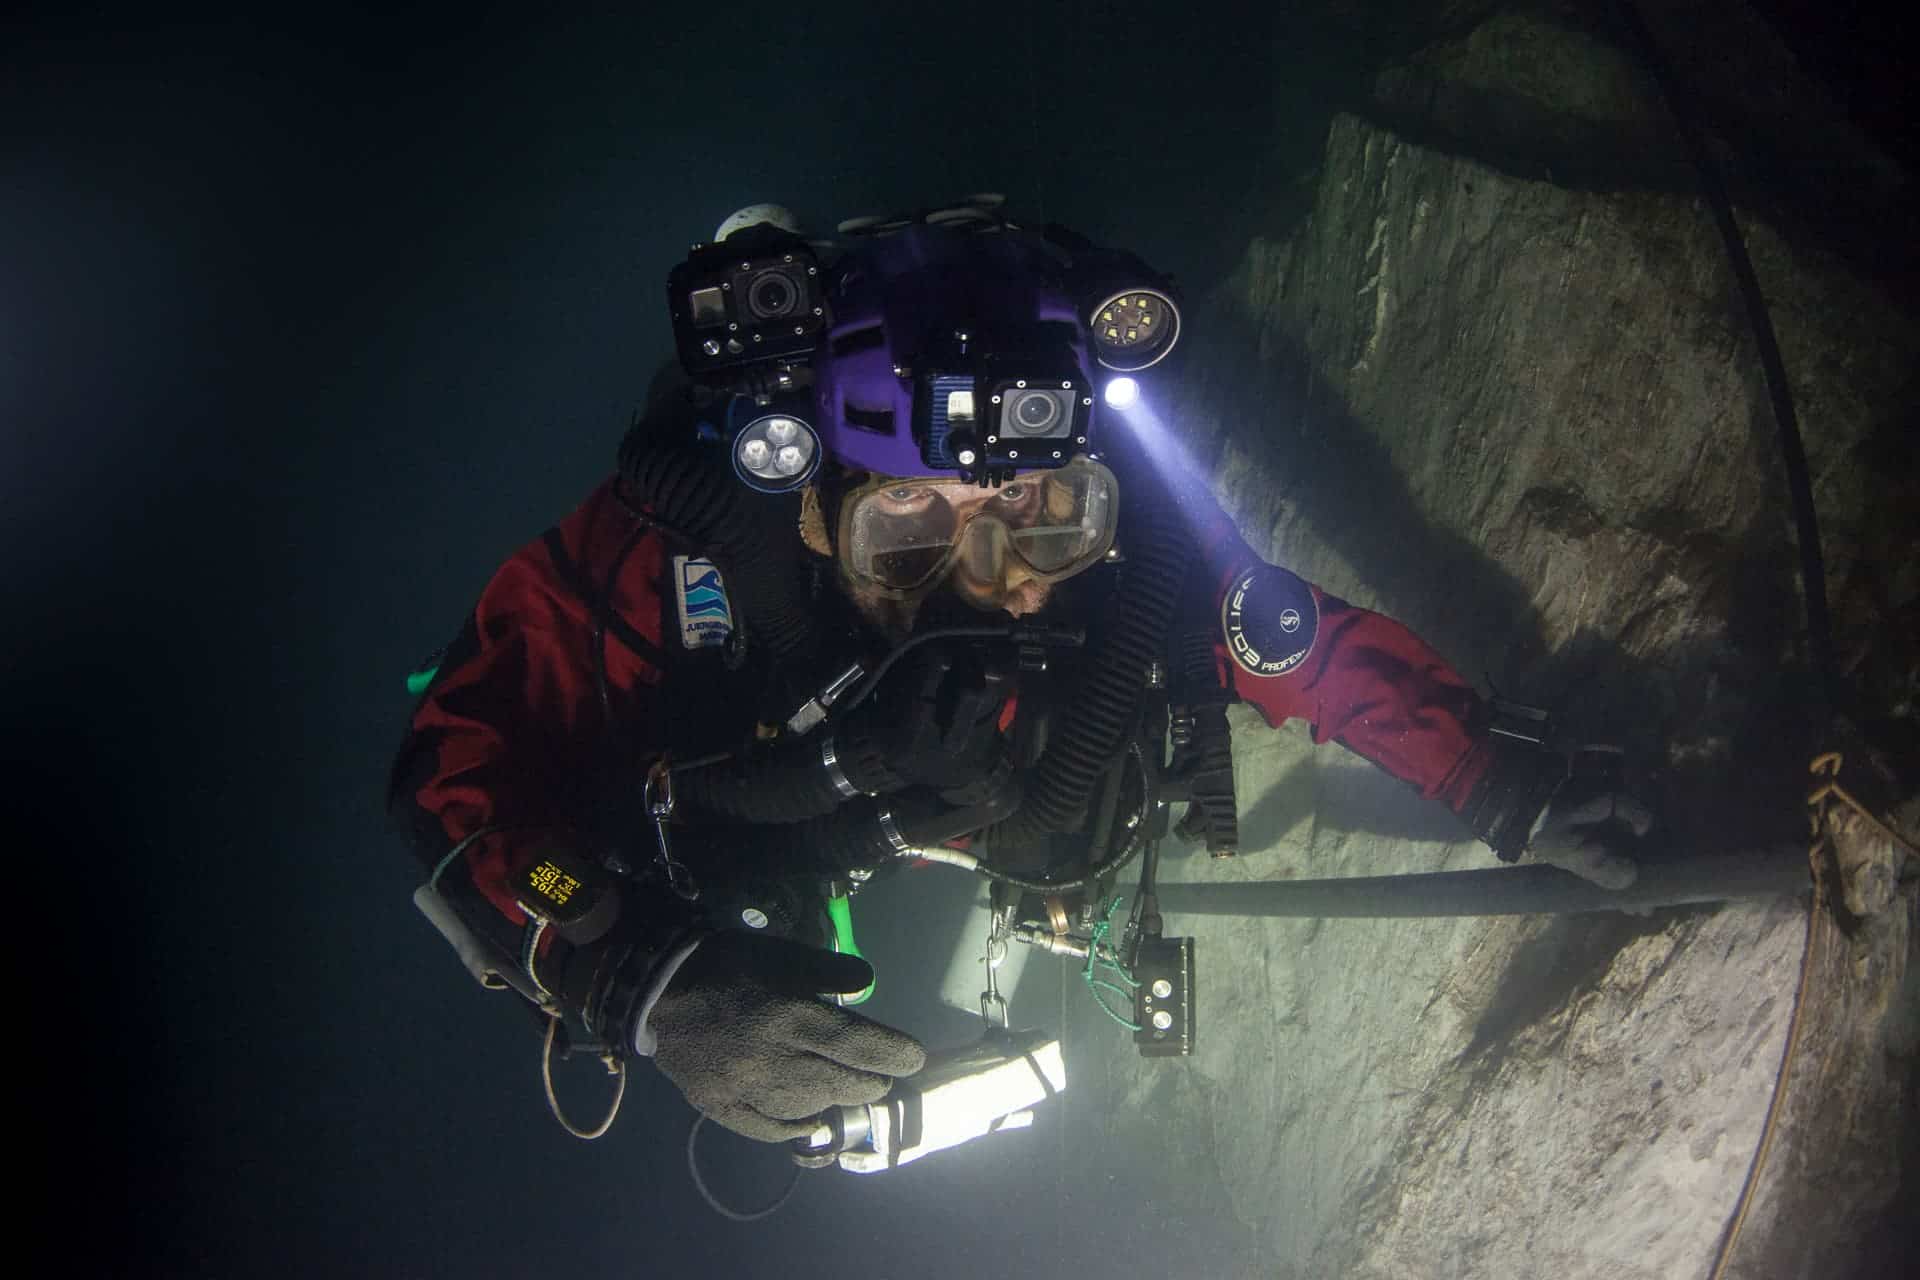 Krzysztof Starnawski first dived in the cave 20 years ago. Now, he led the team that found that 